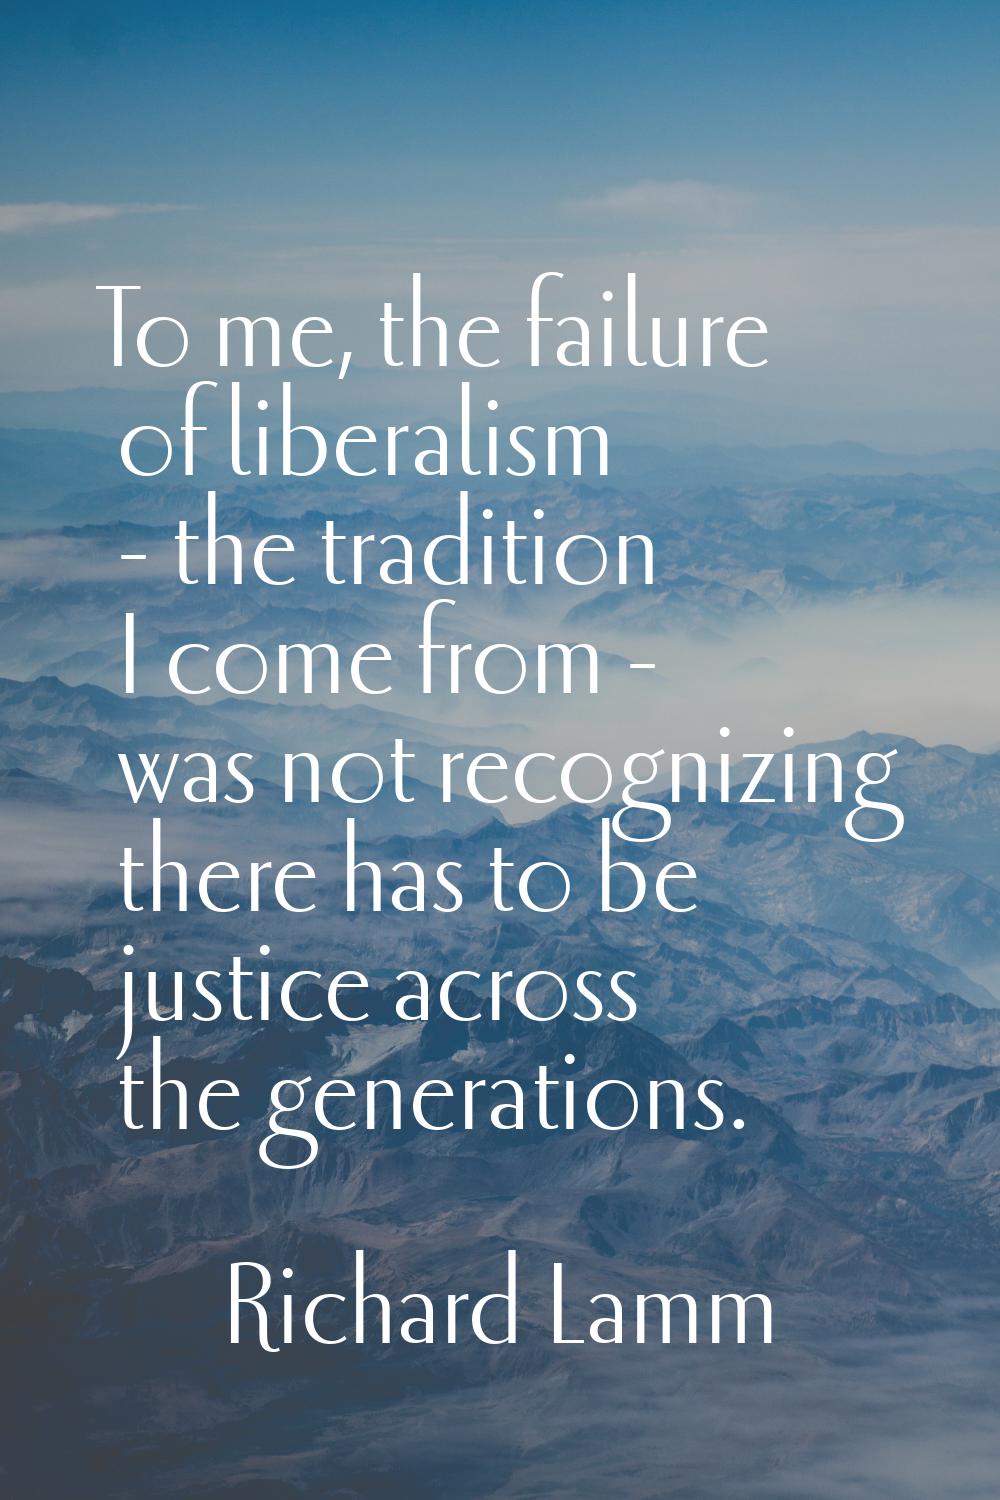 To me, the failure of liberalism - the tradition I come from - was not recognizing there has to be 